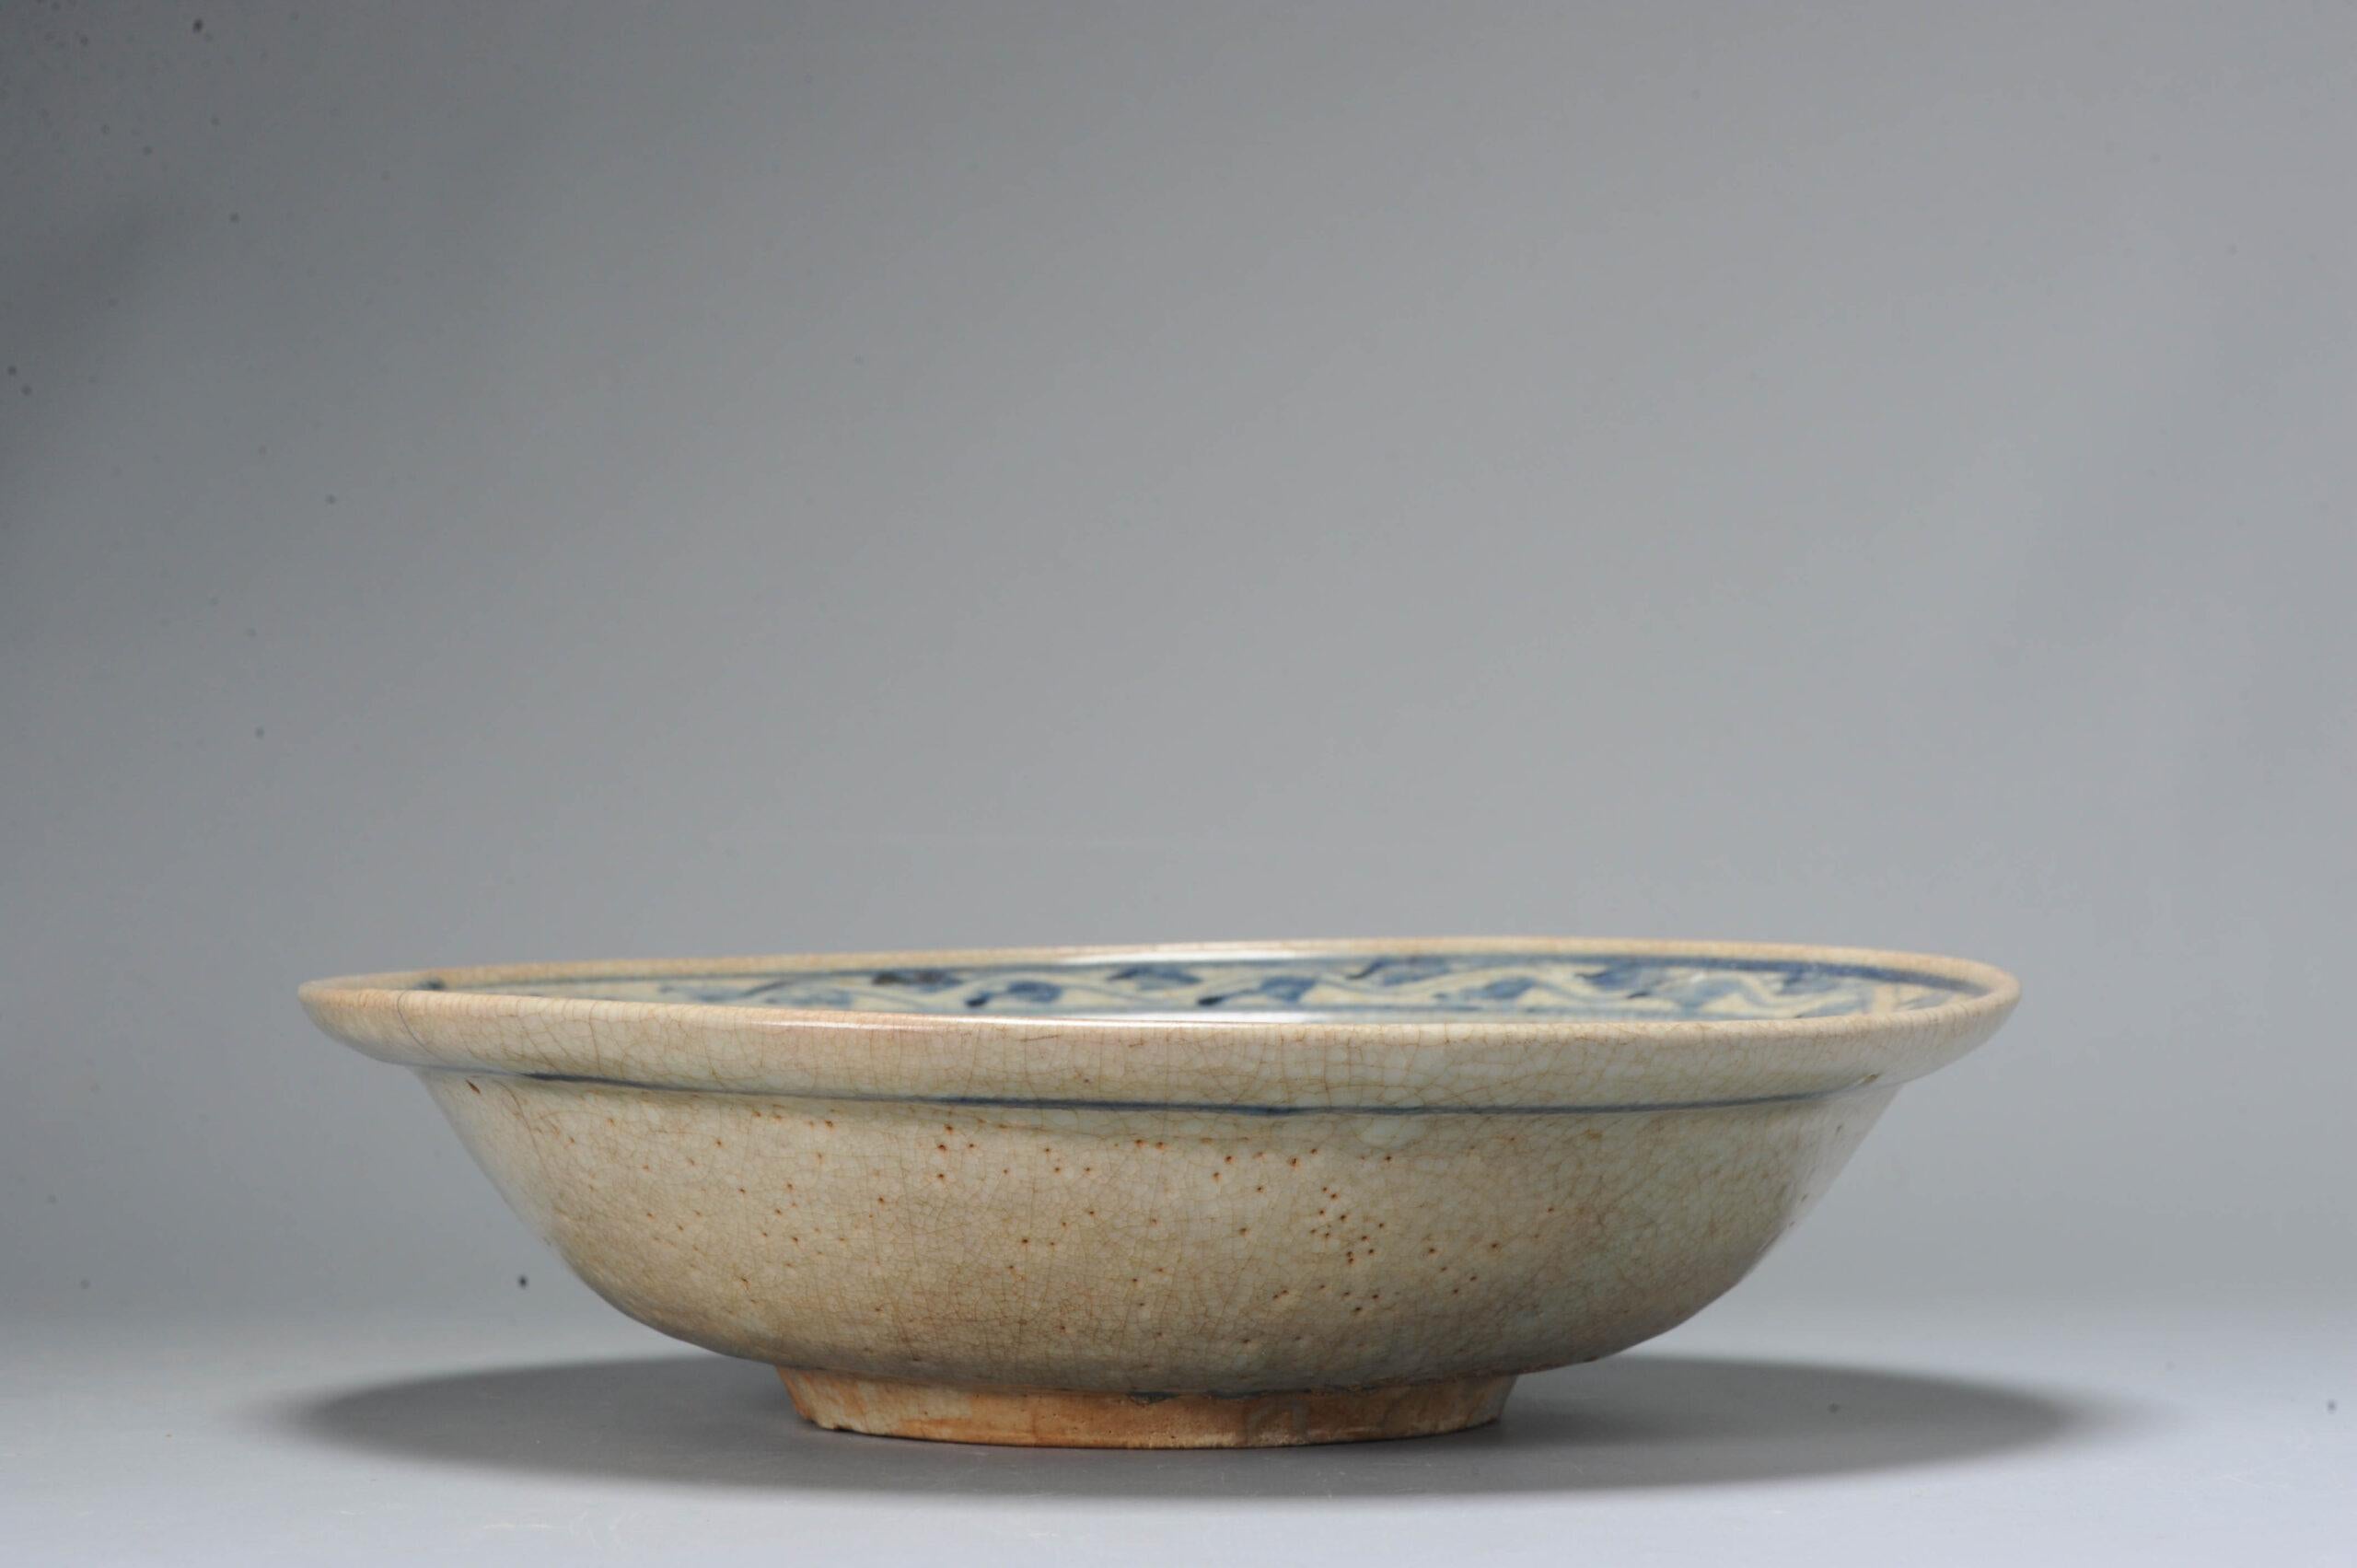 A very nicely decorated Charger from the 15th/16th century.

Additional information:
Material: Porcelain & Pottery
Type: Chargers (Large Plates)
Color: Blue & White
Region of Origin: China
Period: 15th century, 16th century Ming & Transitional (1368